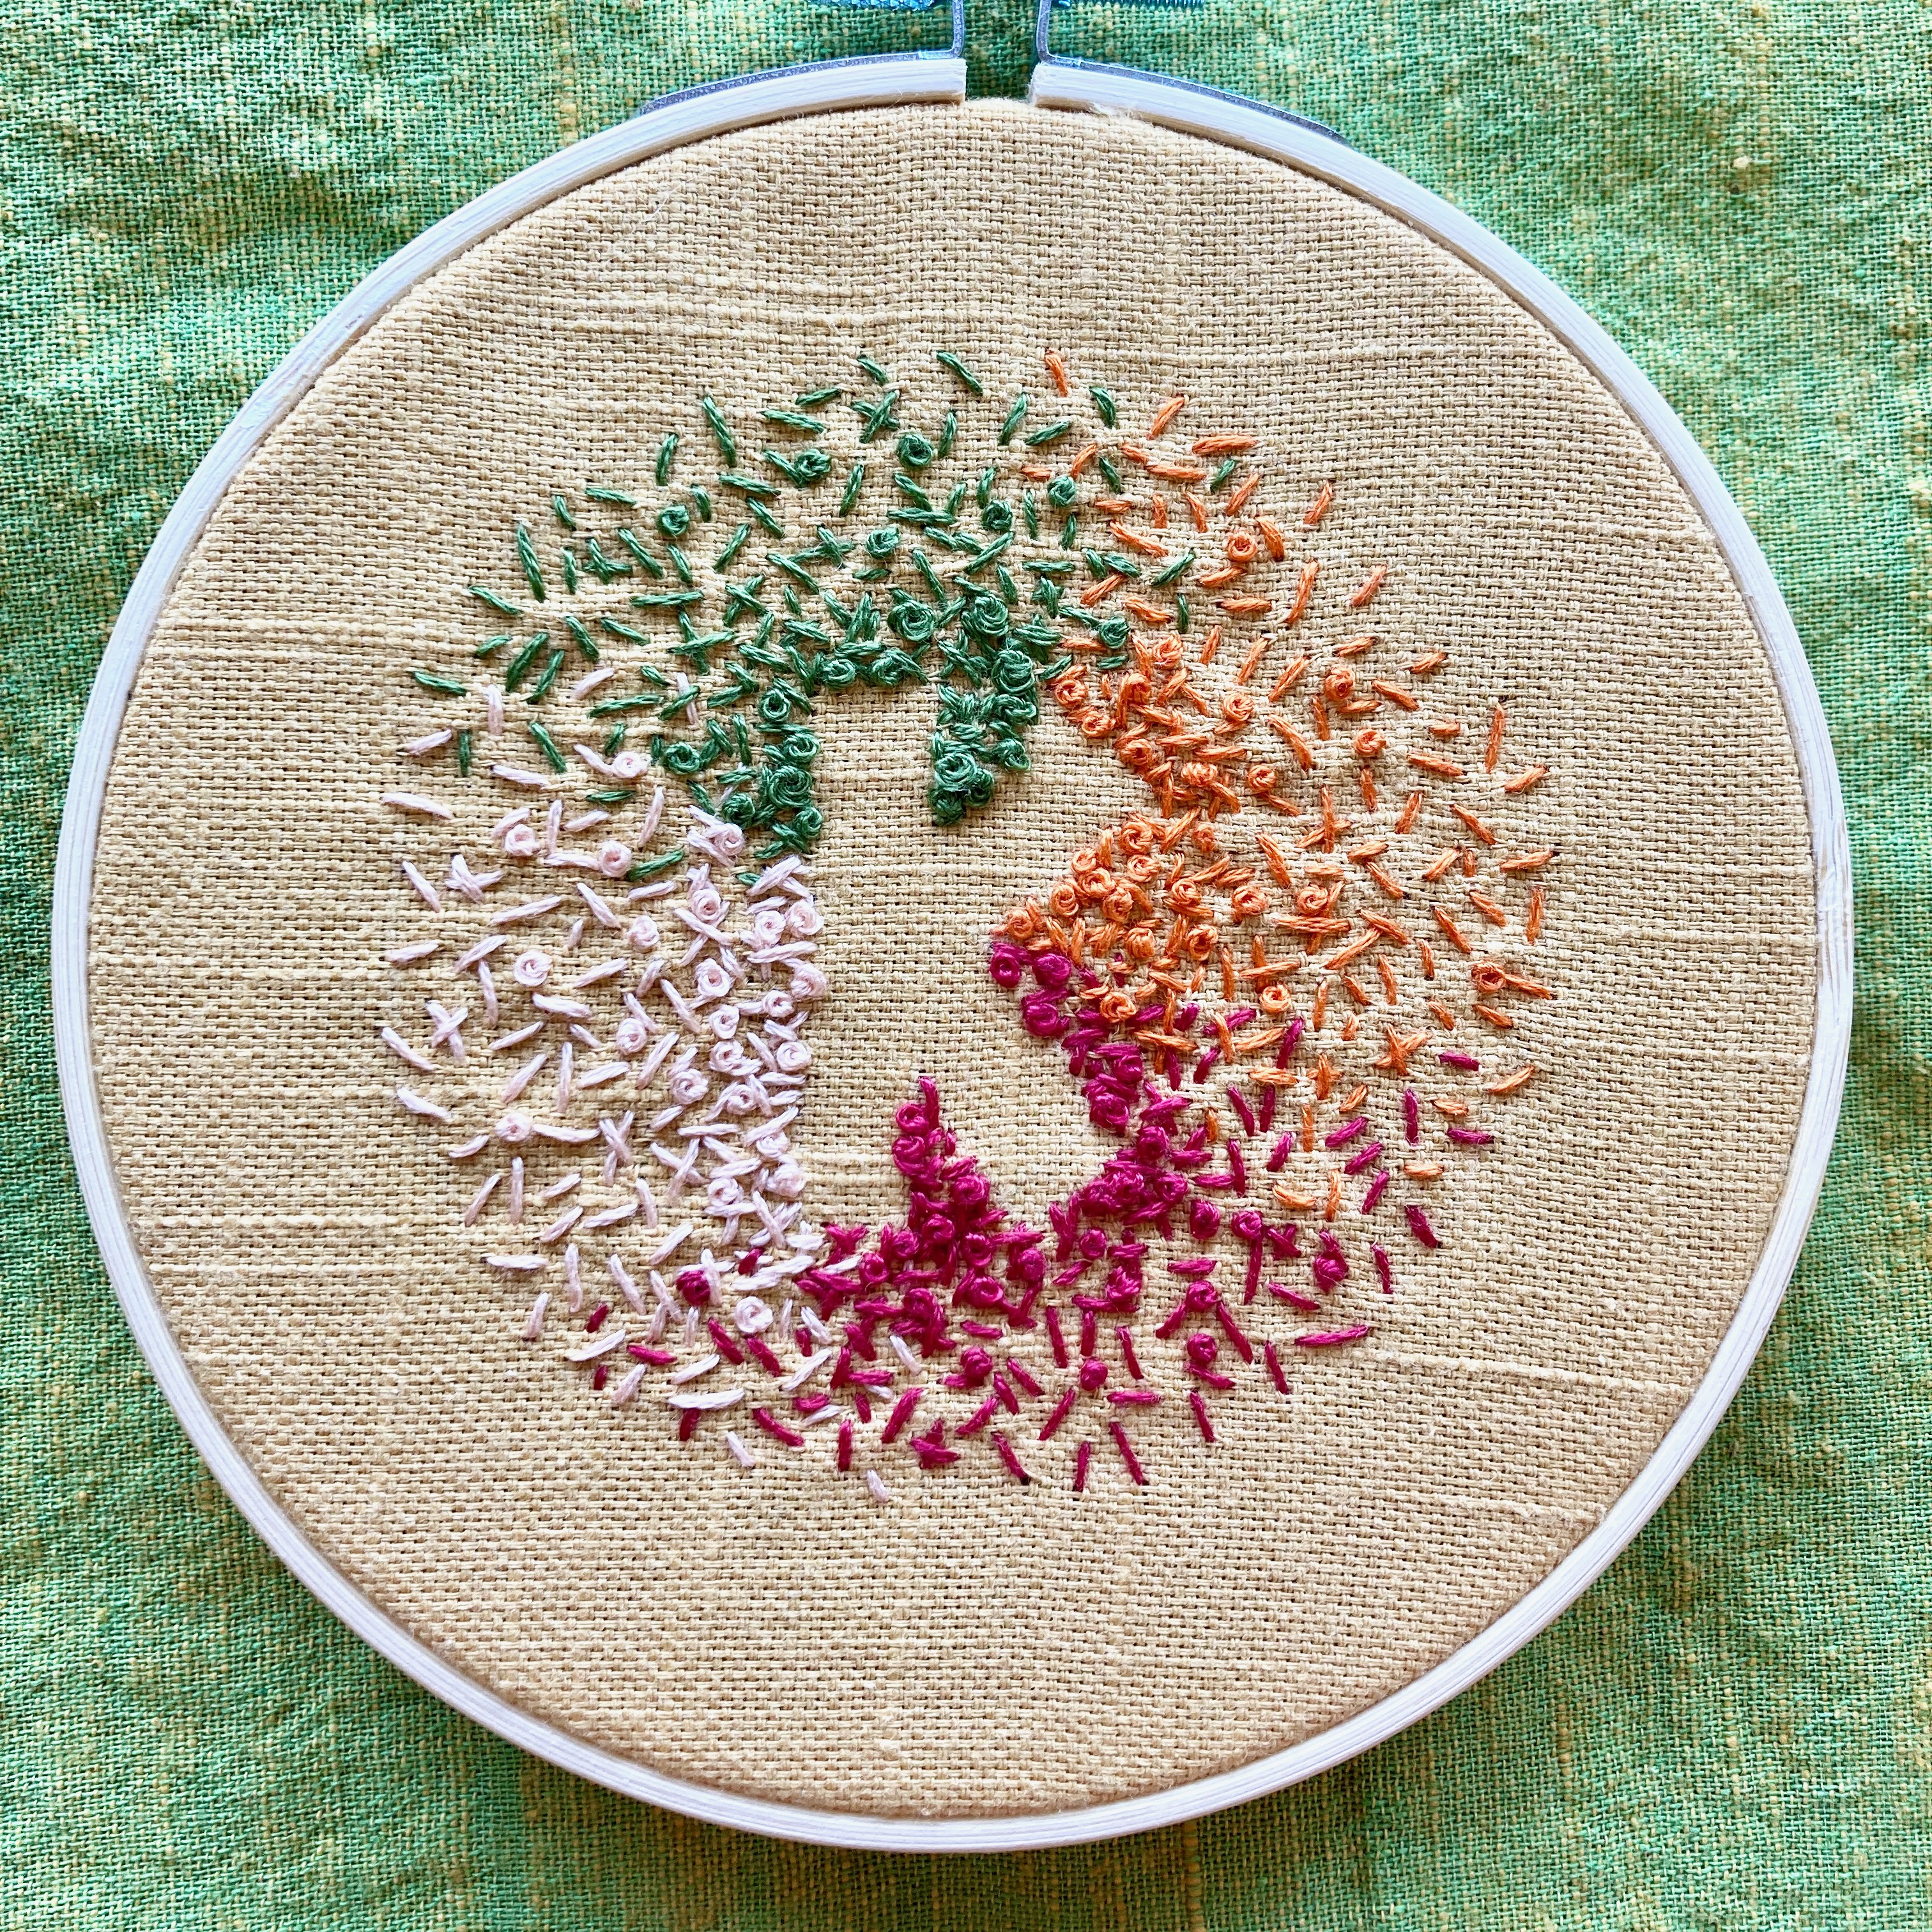 Sampler: Introduction to Hand Embroidery